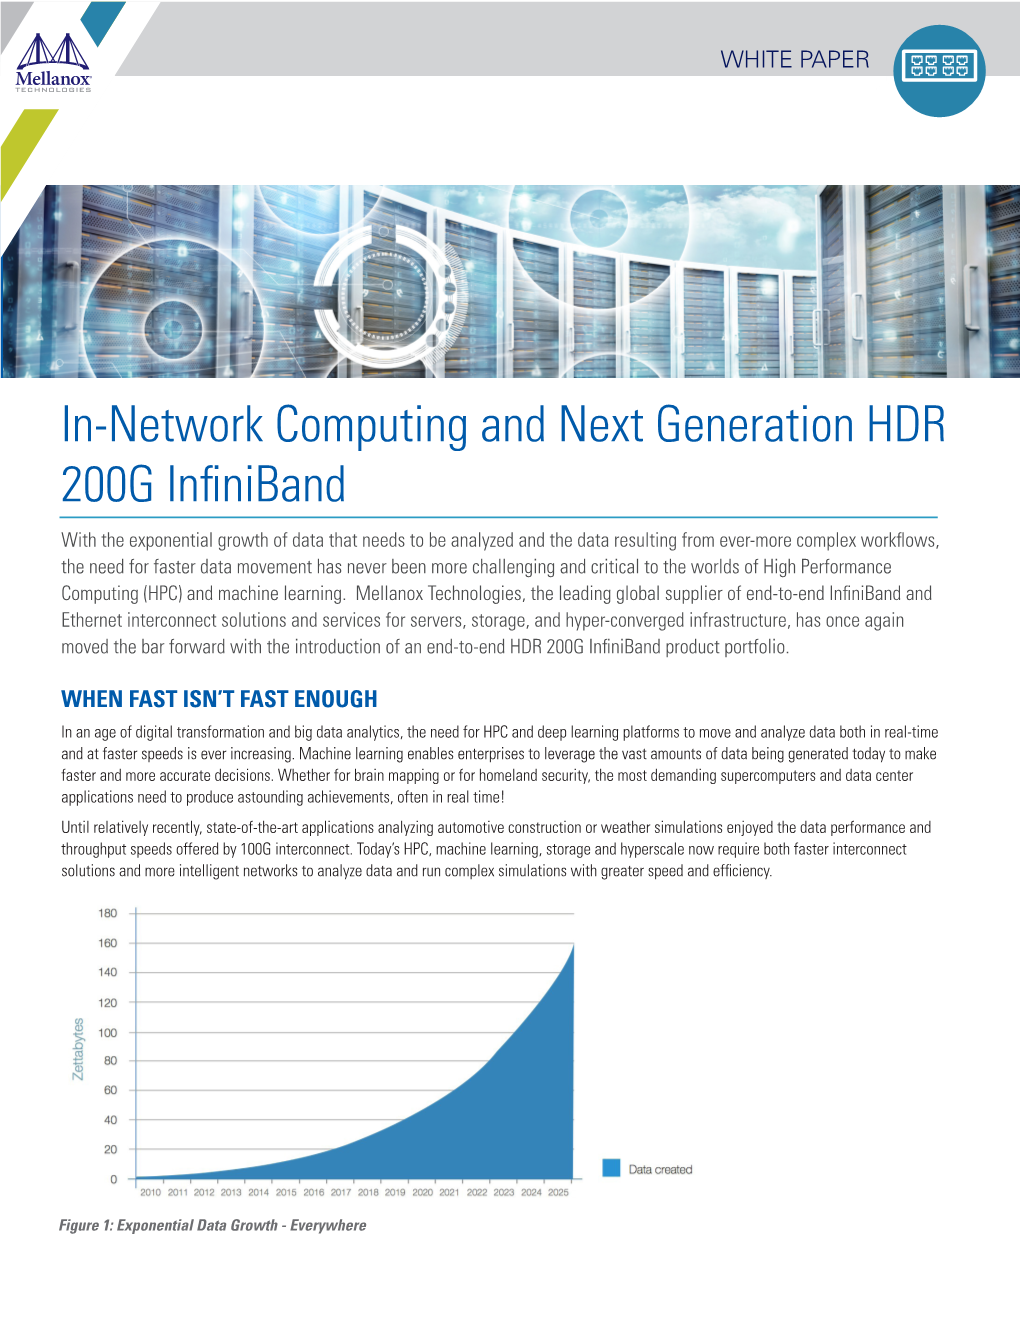 In-Network Computing and Next Generation HDR 200G Infiniband